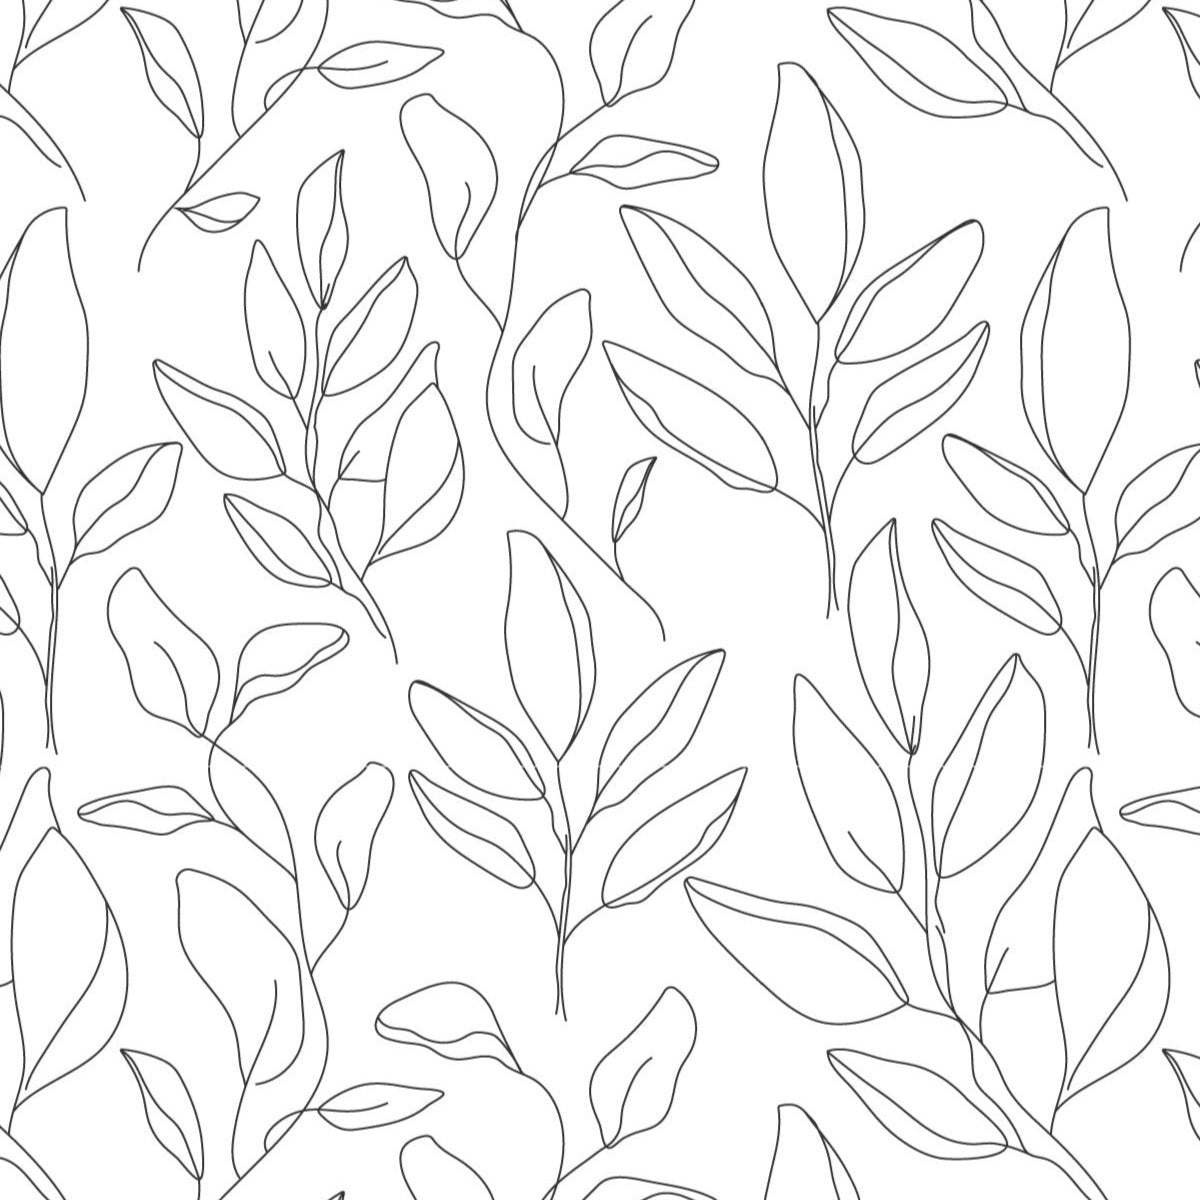 A detailed close-up of the Black Floral Wallpaper, featuring a delicate black line art design of leaves on a crisp white background.